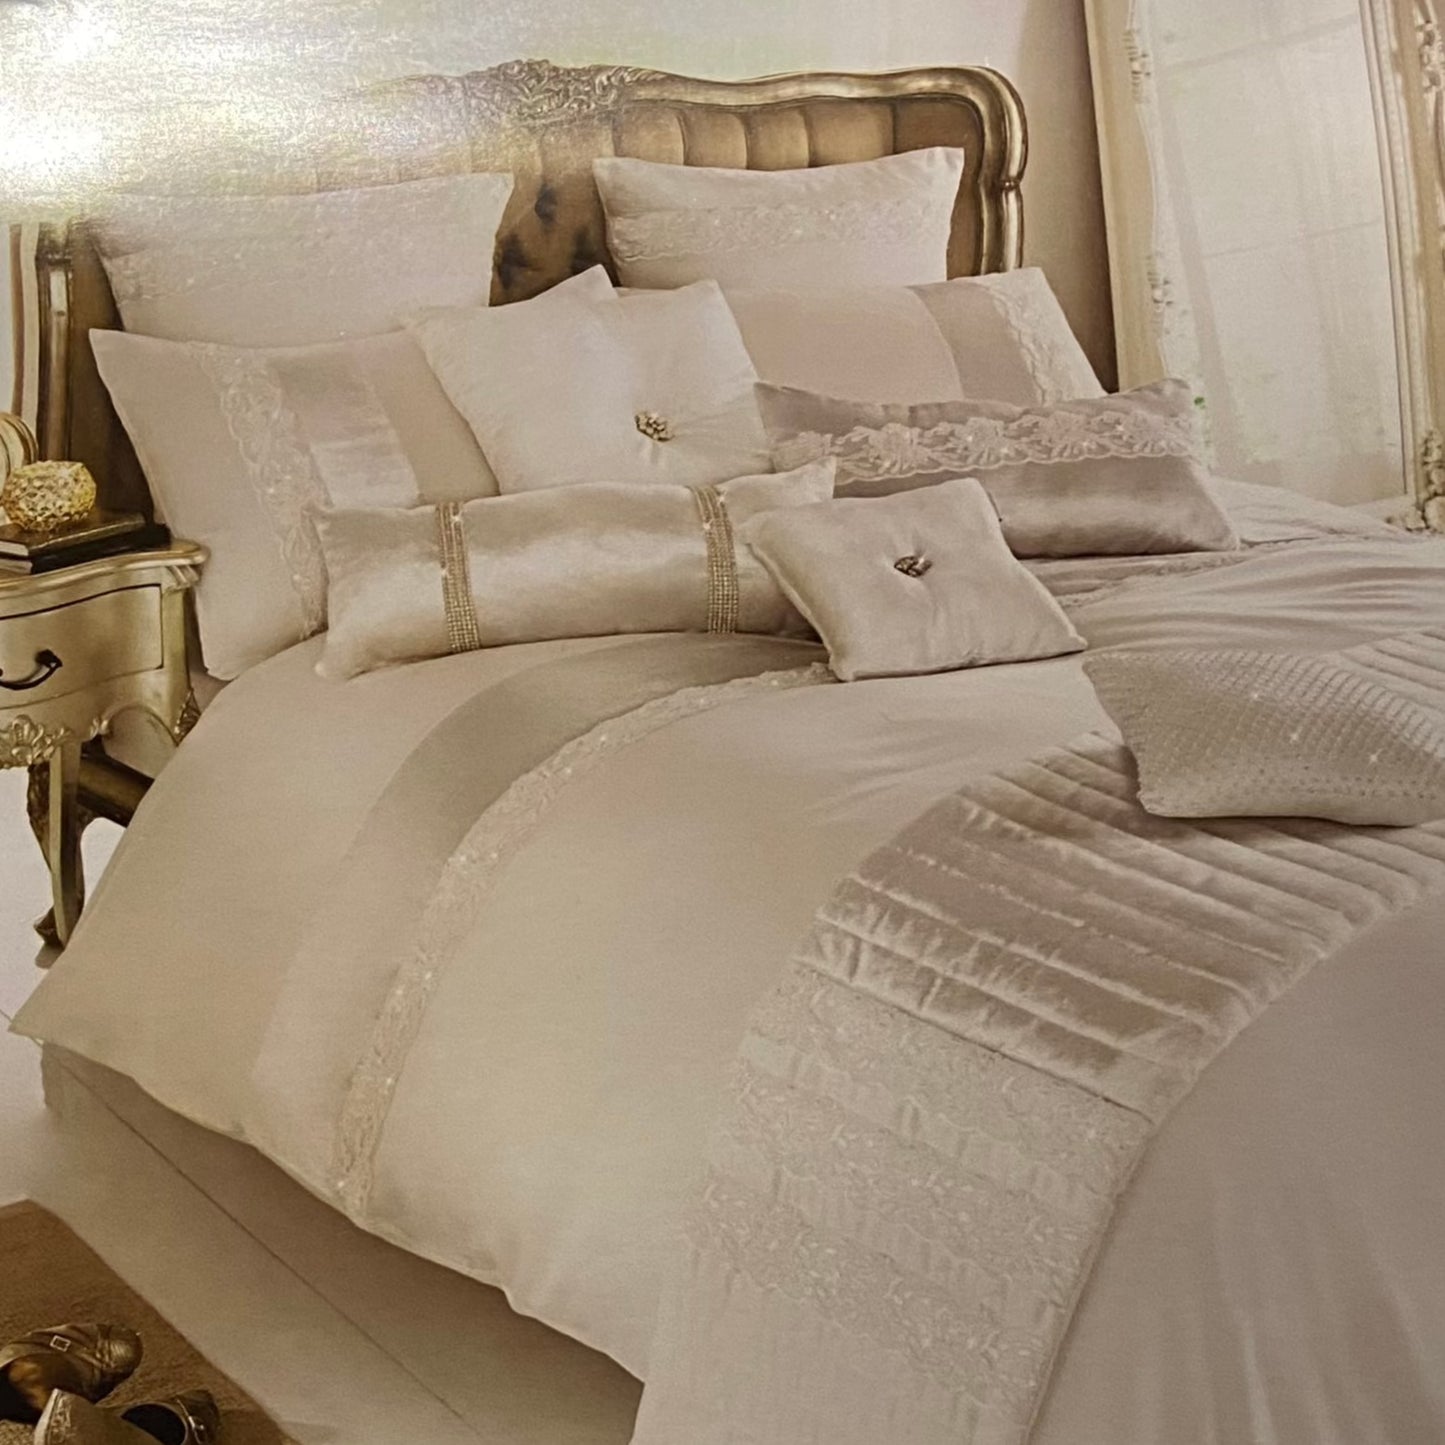 Madaline Square Pillowcase by Kylie Minogue at Home